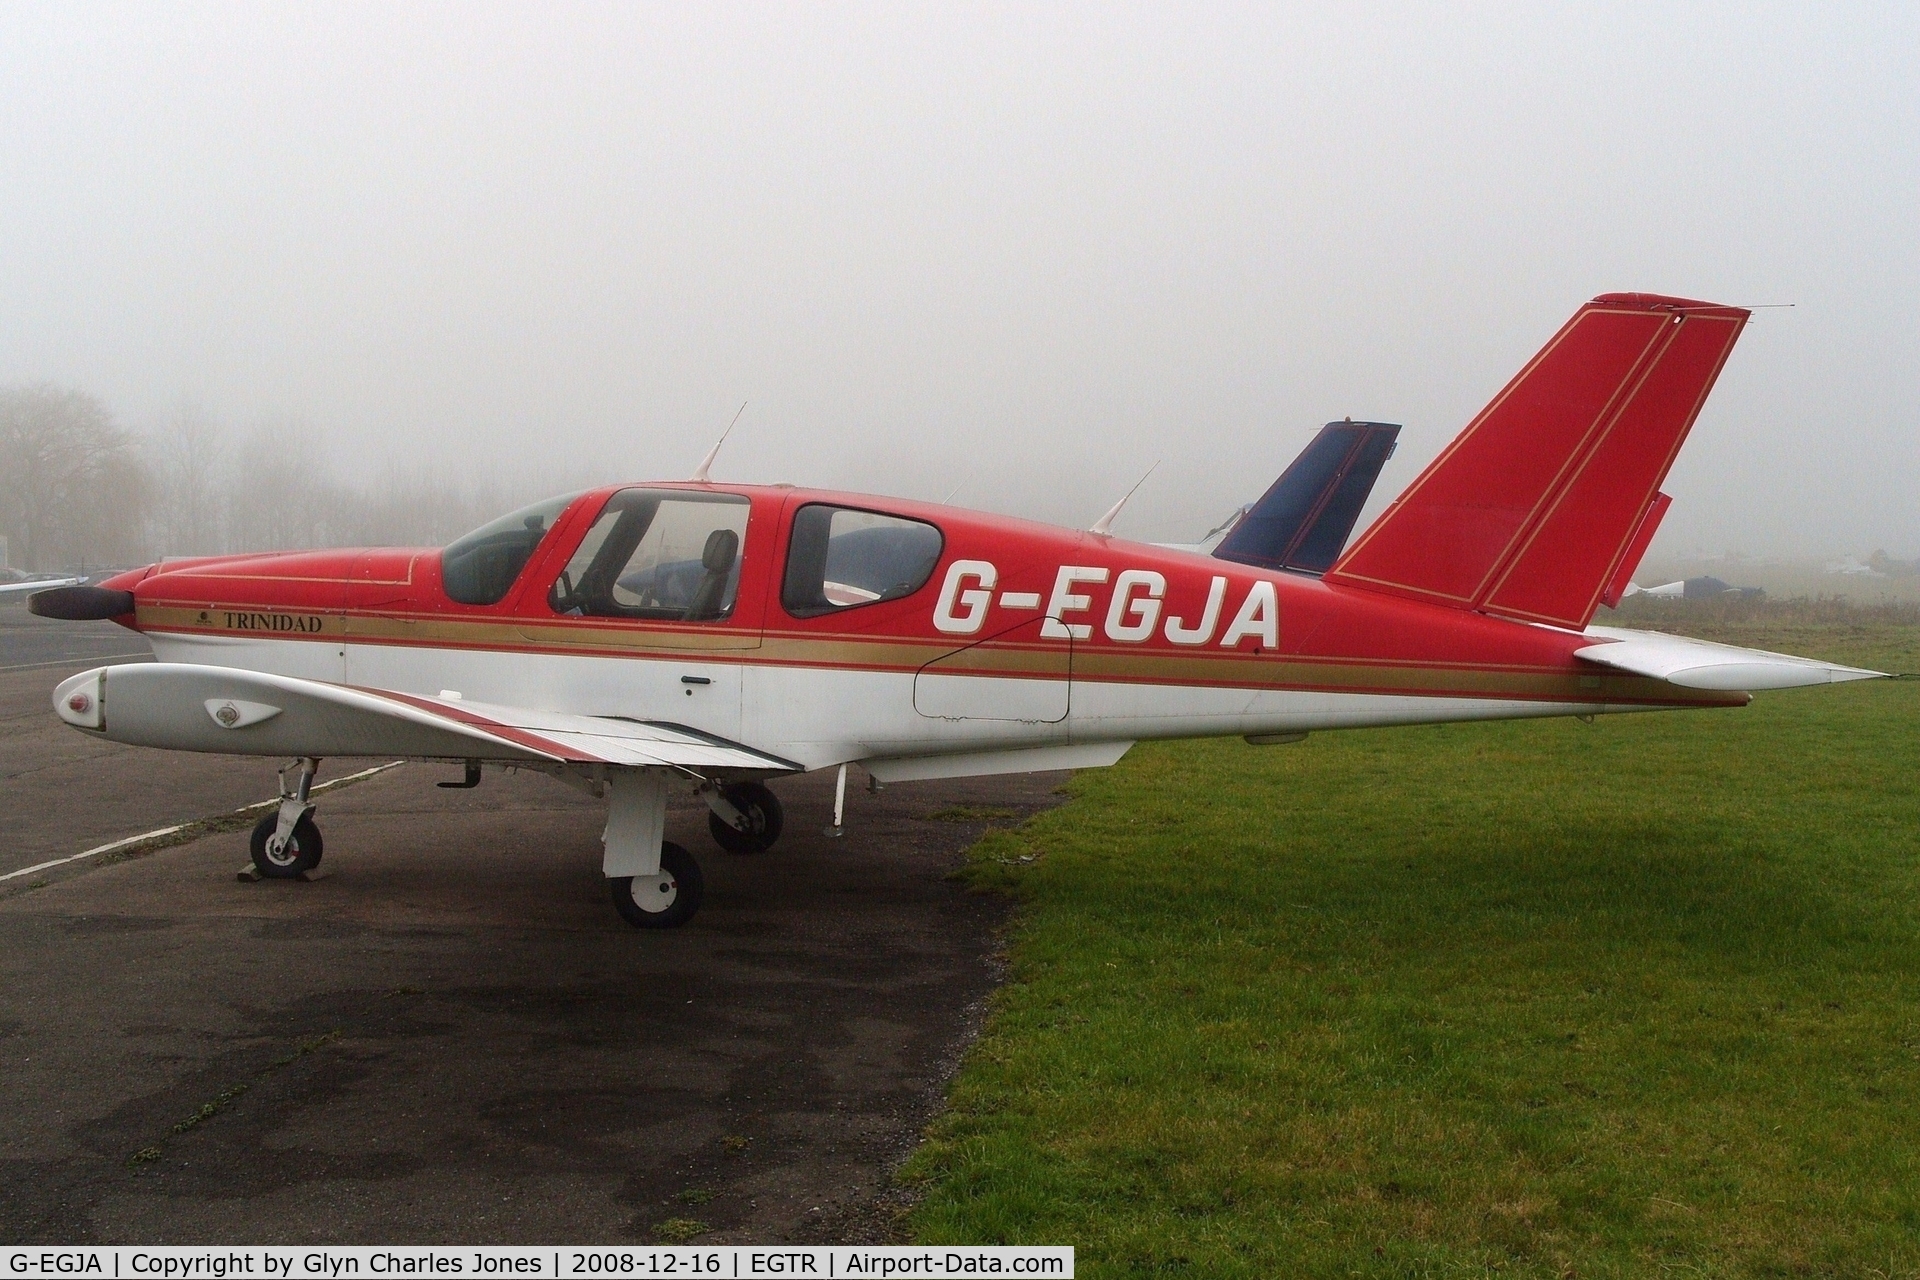 G-EGJA, 1990 Socata TB-20 Trinidad C/N 1101, Taken on a quiet cold and foggy day. With thanks to Elstree control tower who granted me authority to take photographs on the aerodrome. Previously N2807D.